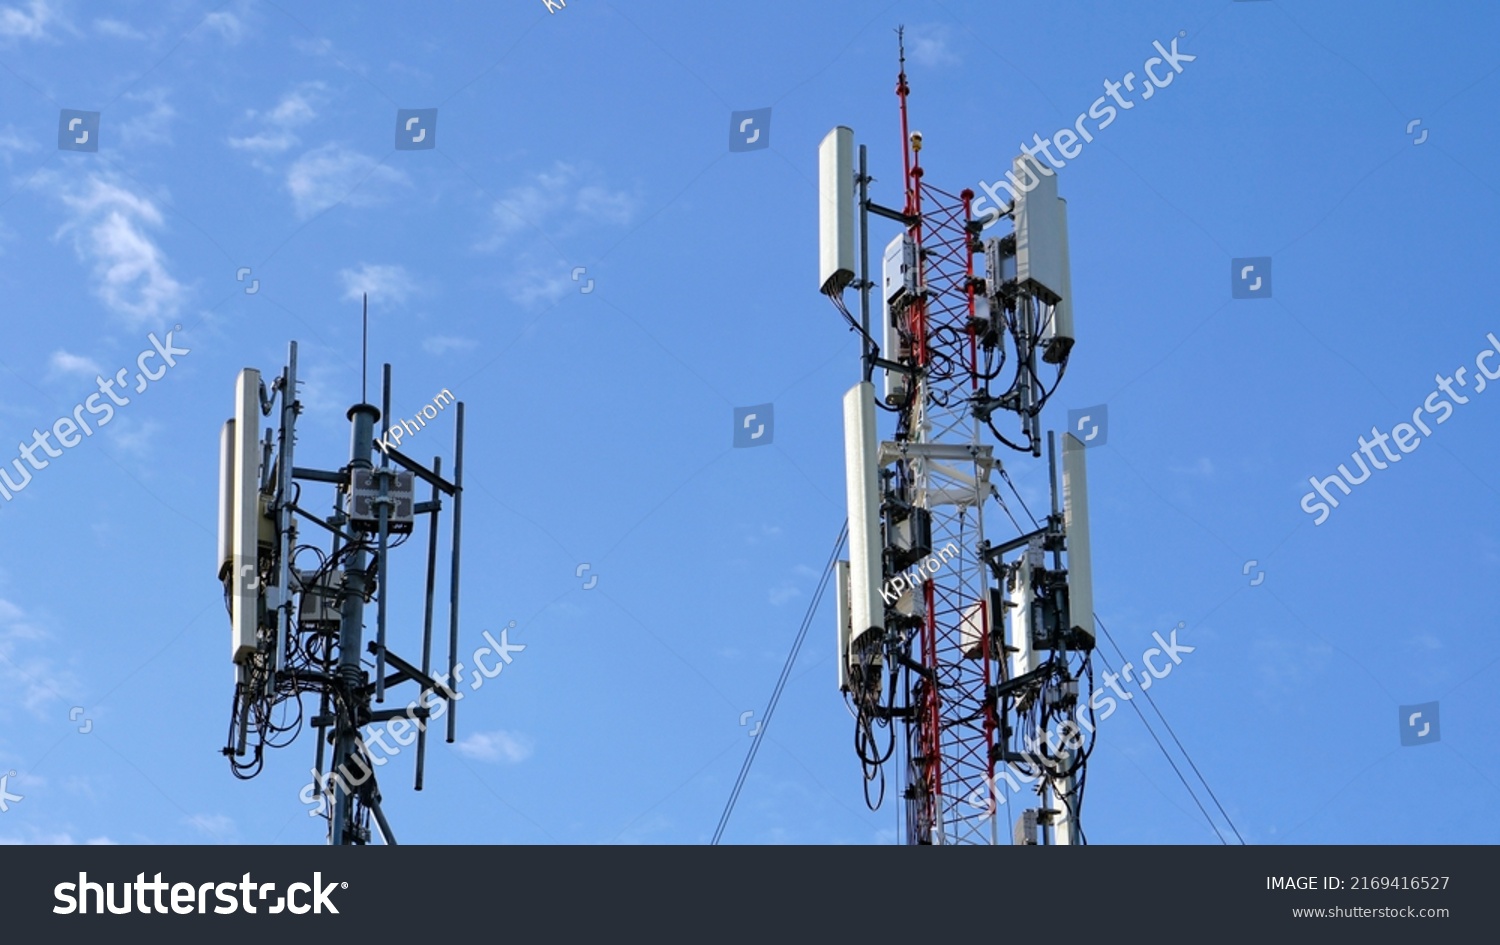 Telecommunication tower of 4G and 5G cellular. Macro Base Station. 5G radio network telecommunication equipment with radio modules and smart antennas mounted on a metal against cloulds sky background. #2169416527